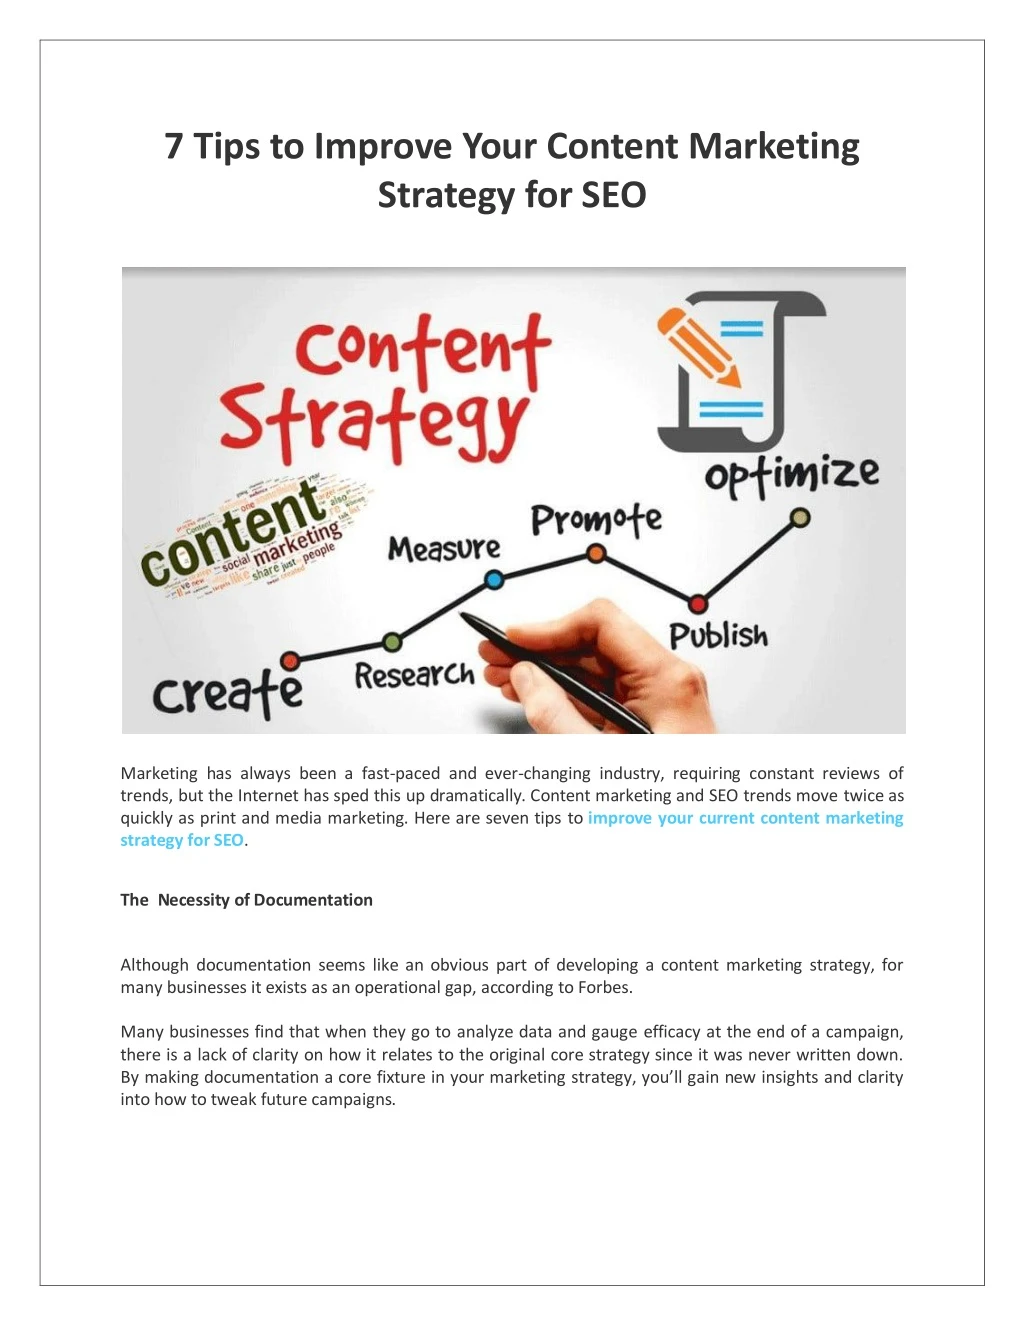 7 tips to improve your content marketing strategy